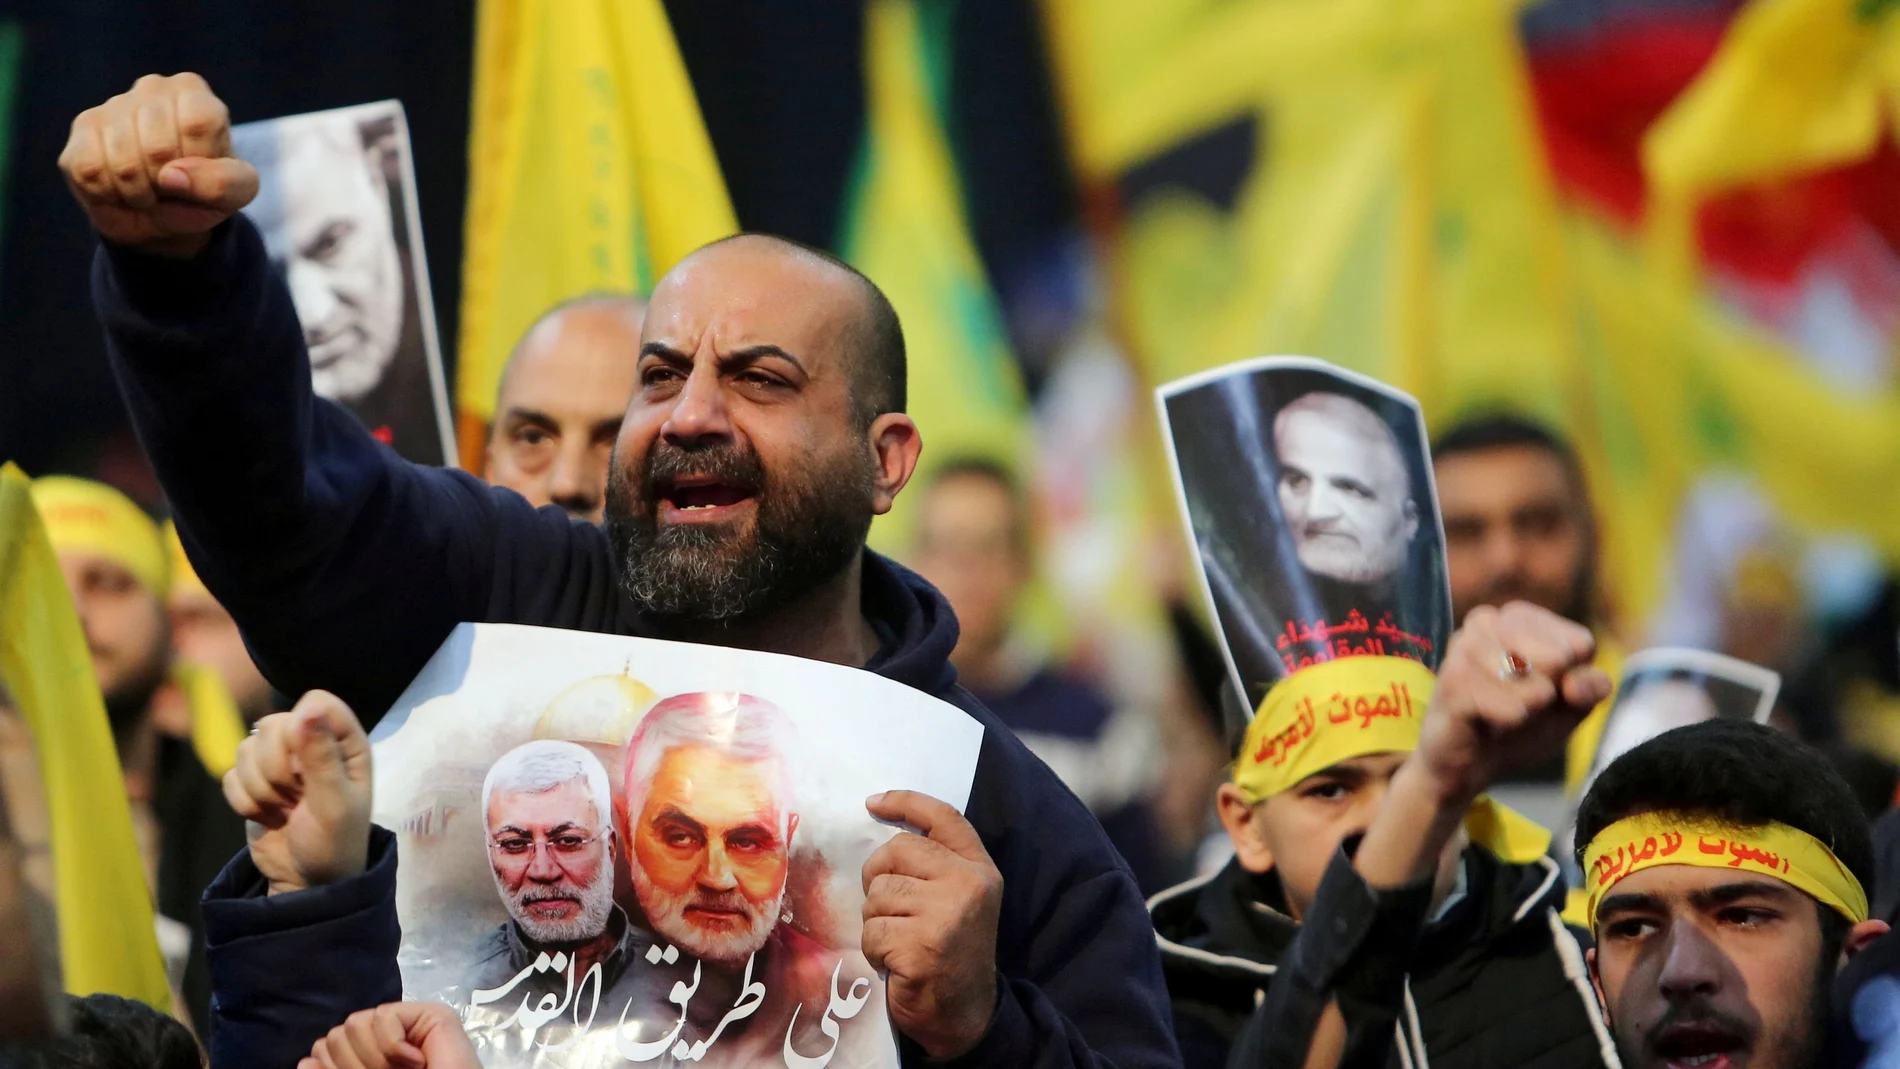 FILE PHOTO: FILE PHOTO: Lebanon's Hezbollah supporters chant slogans during a funeral ceremony rally to mourn Qassem Soleimani, head of the elite Quds Force, who was killed in an air strike at Baghdad airport, in Beirut's suburbs